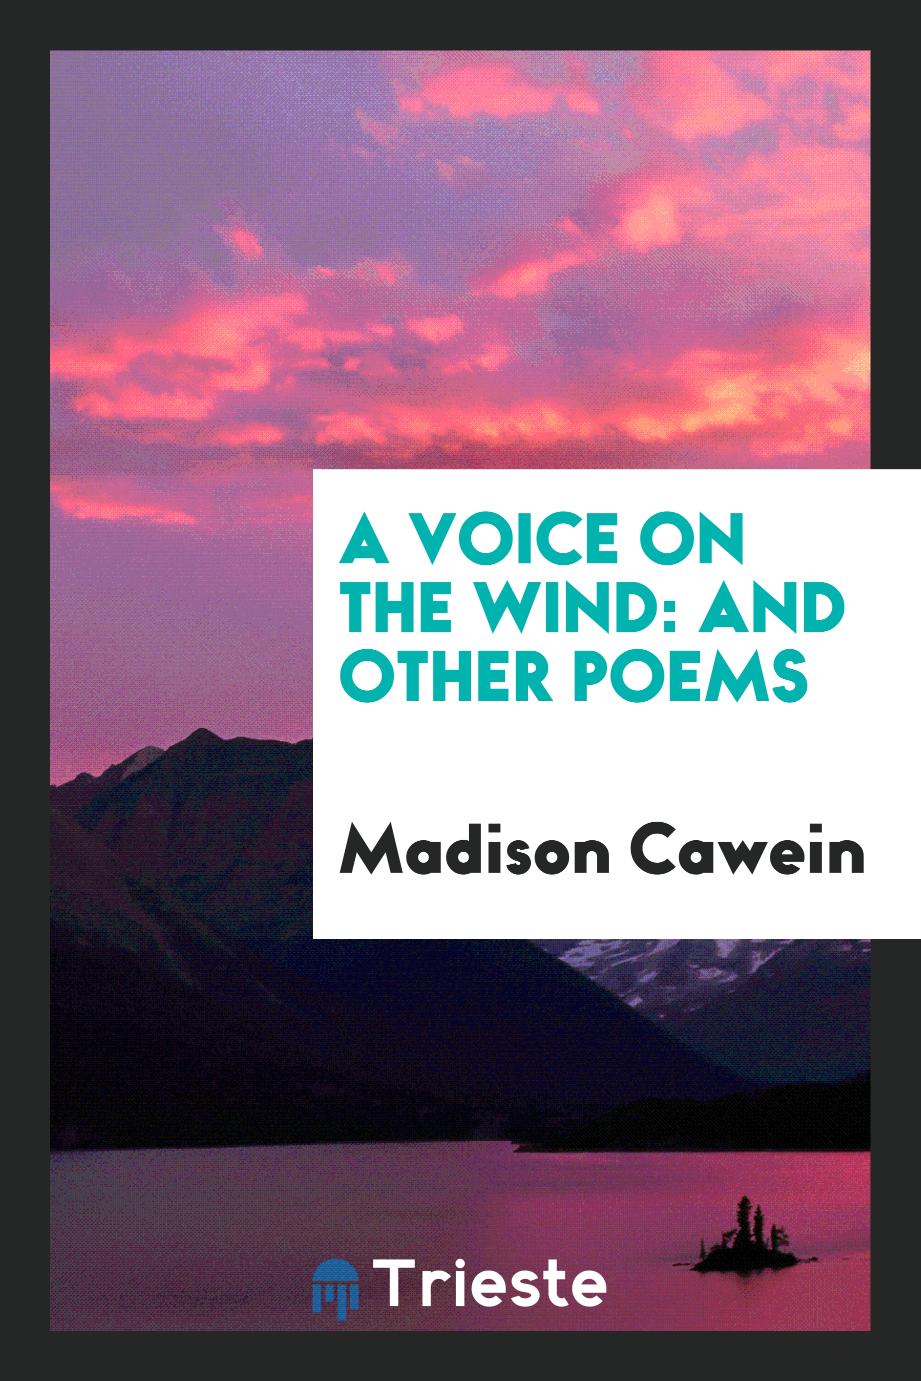 A Voice on the Wind: And Other Poems